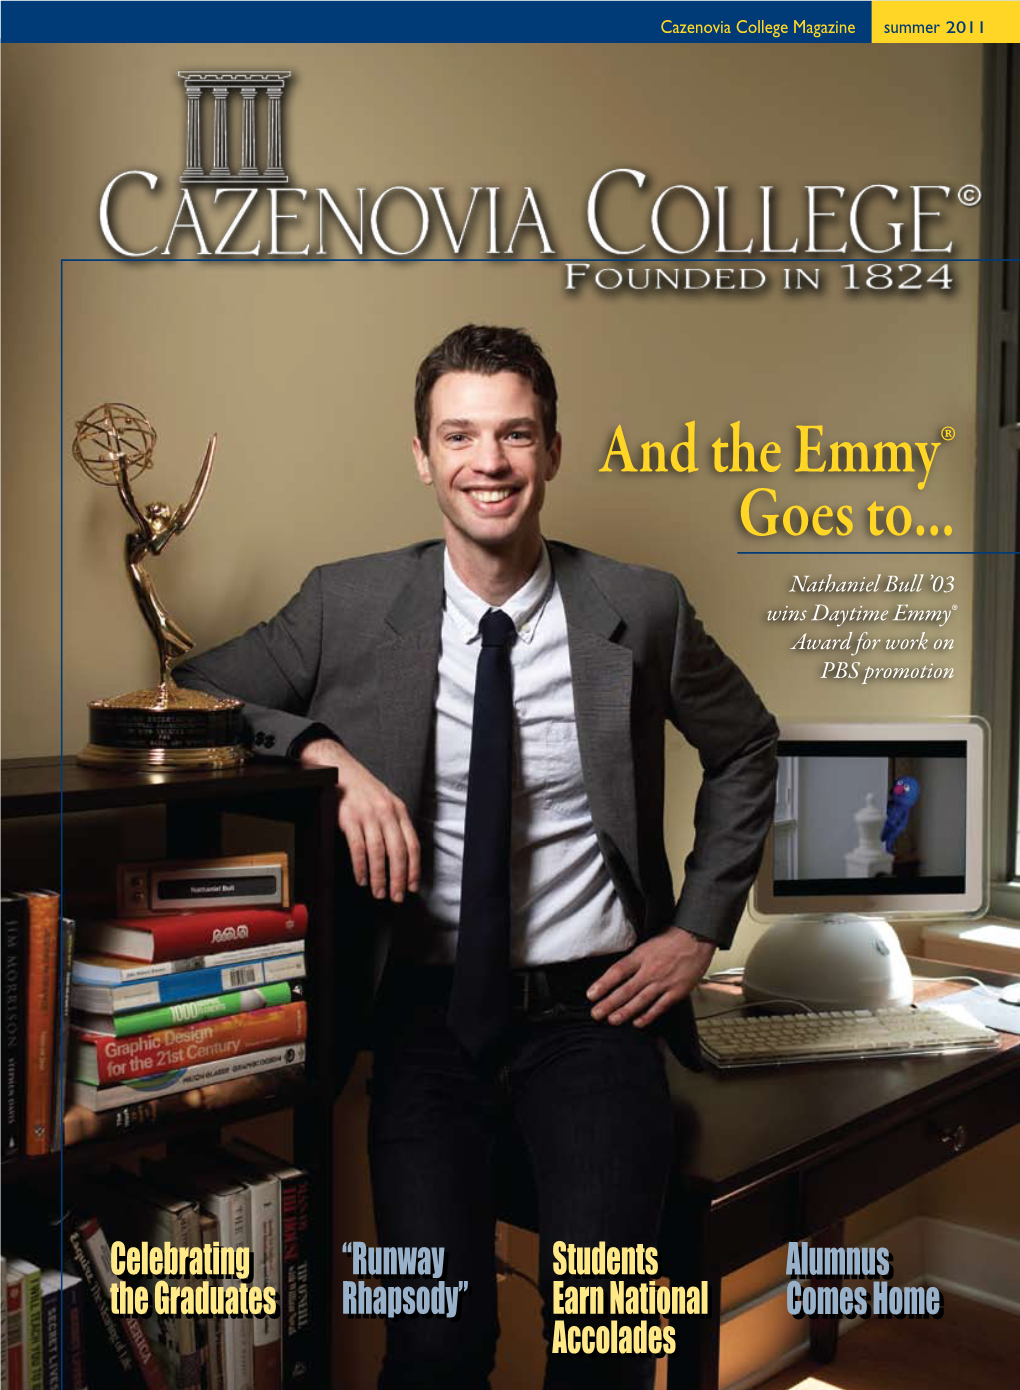 And the Emmy® Goes To... Nathaniel Bull ’03 Wins Daytime Emmy® Award for Work on PBS Promotion